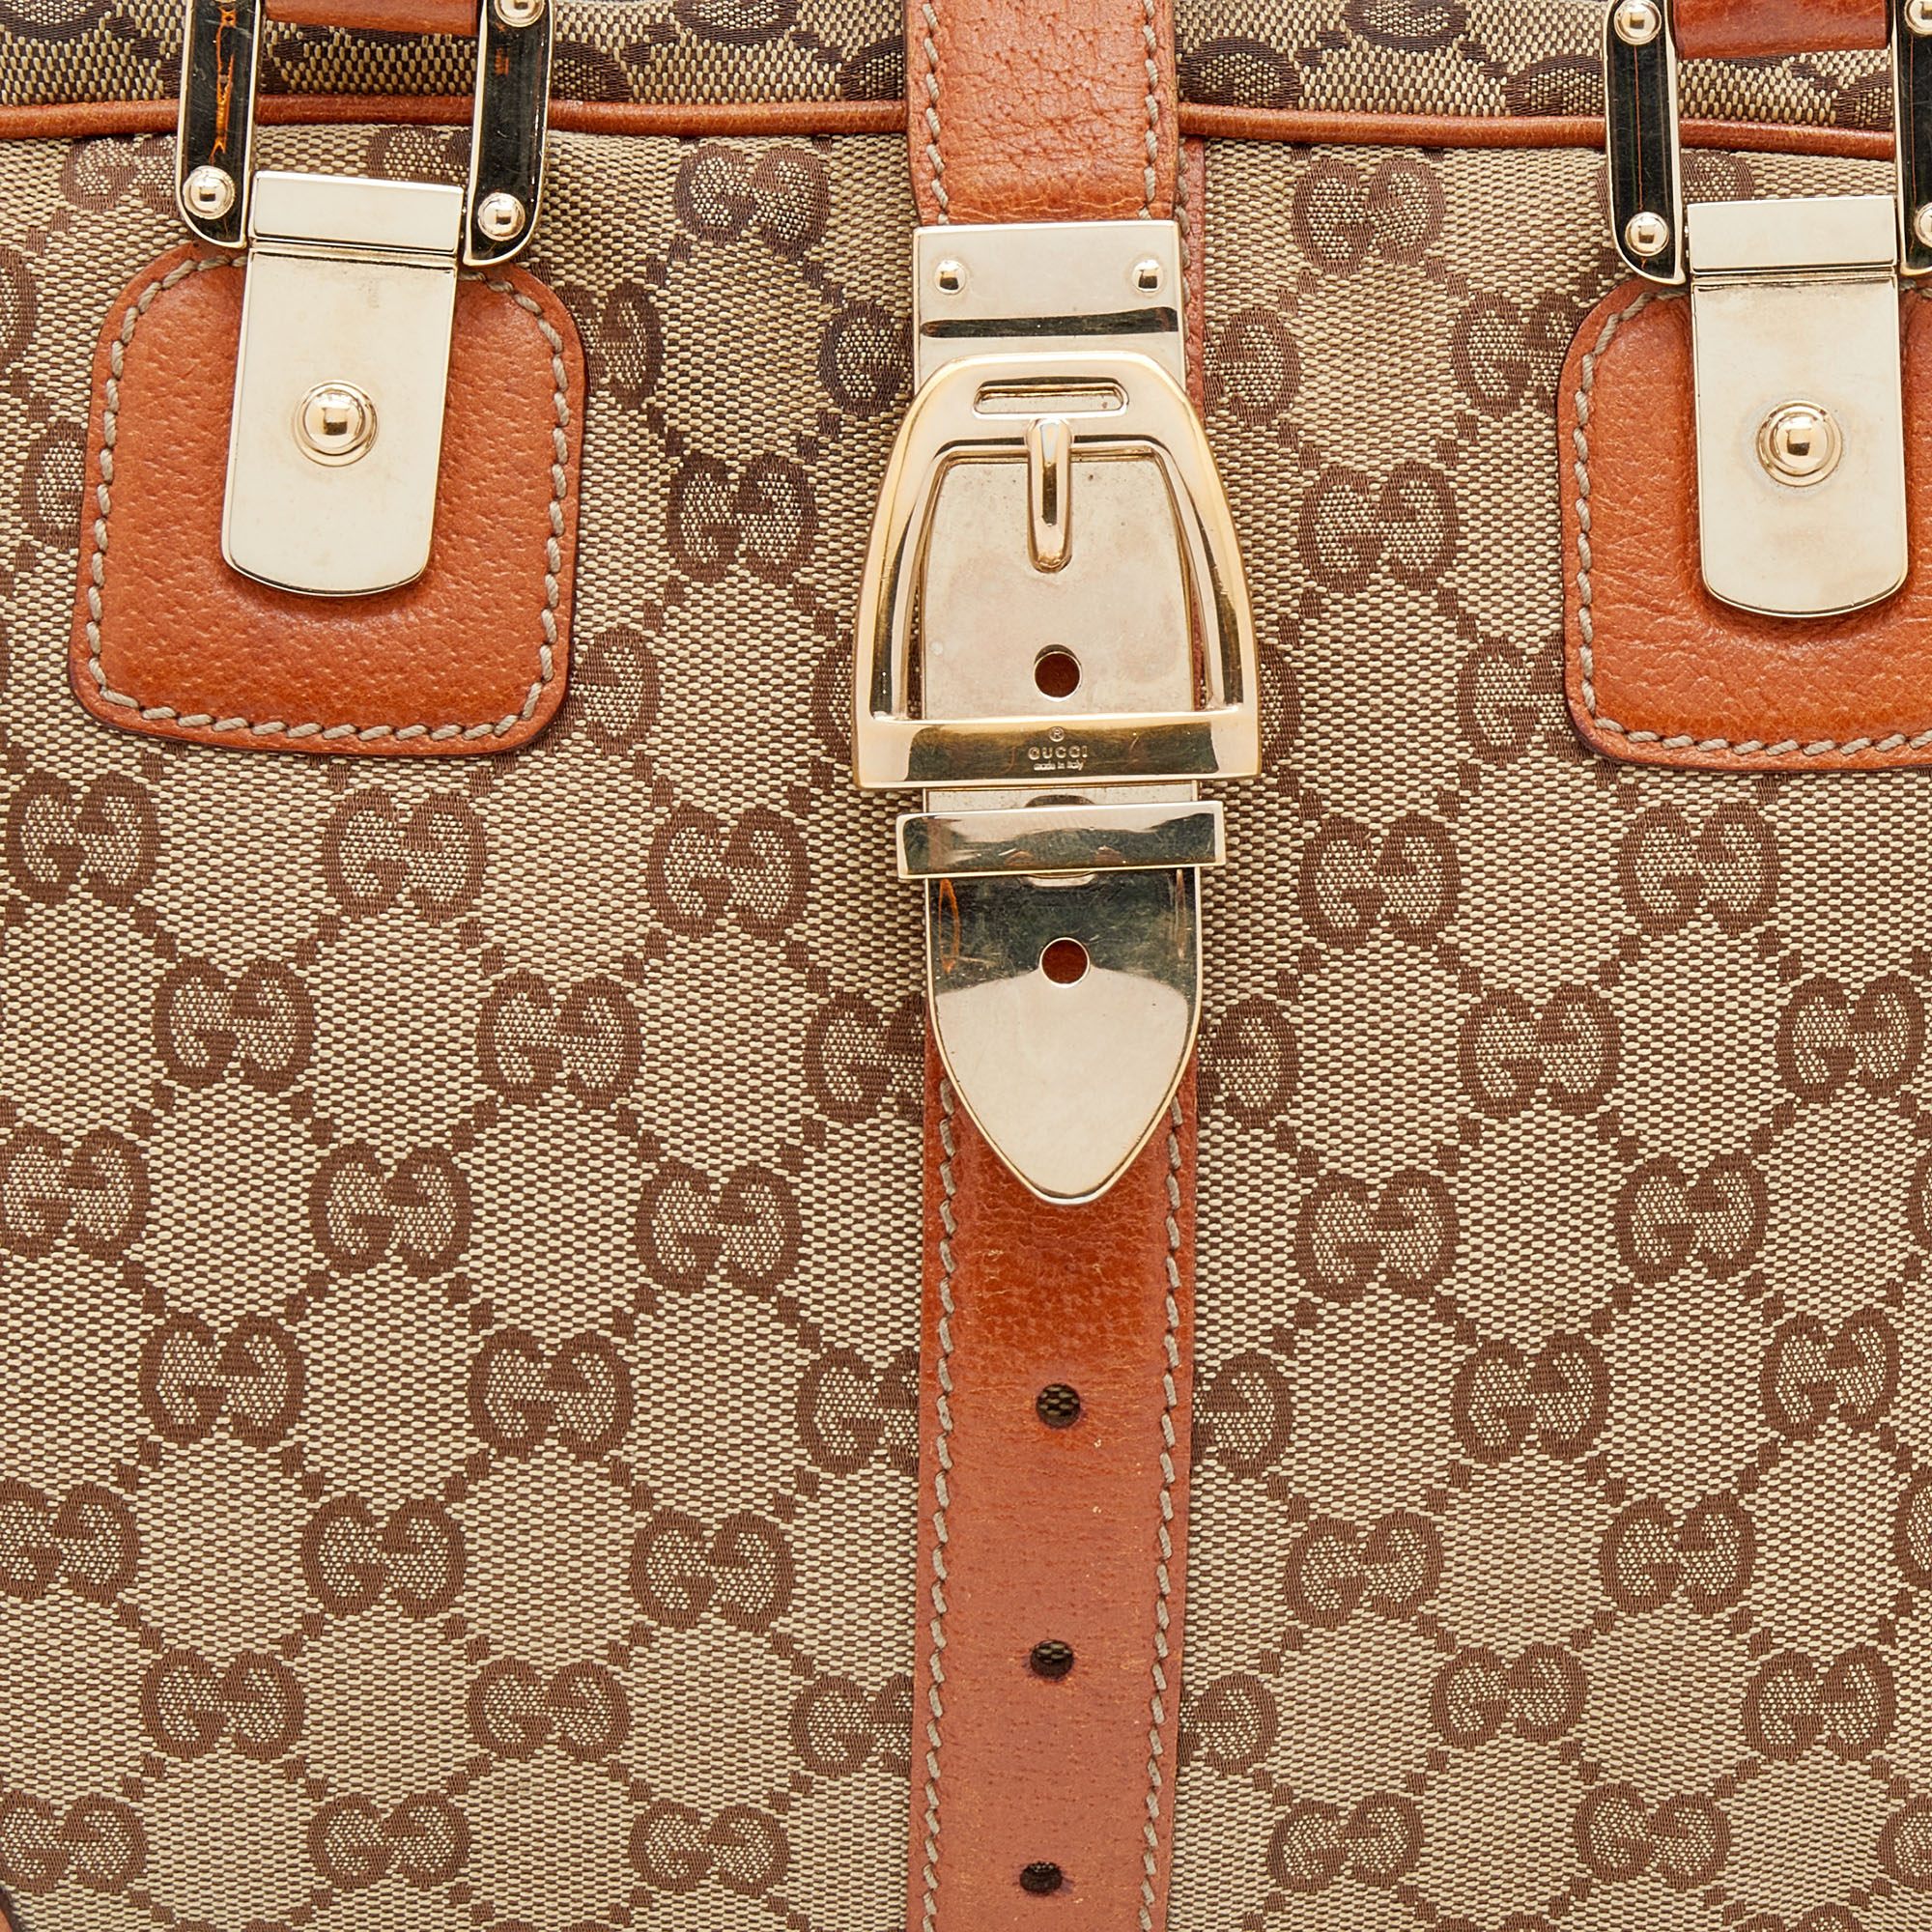 Gucci Brown/Beige GG Canvas And Leather Buckle Flap Glam Boston Bag